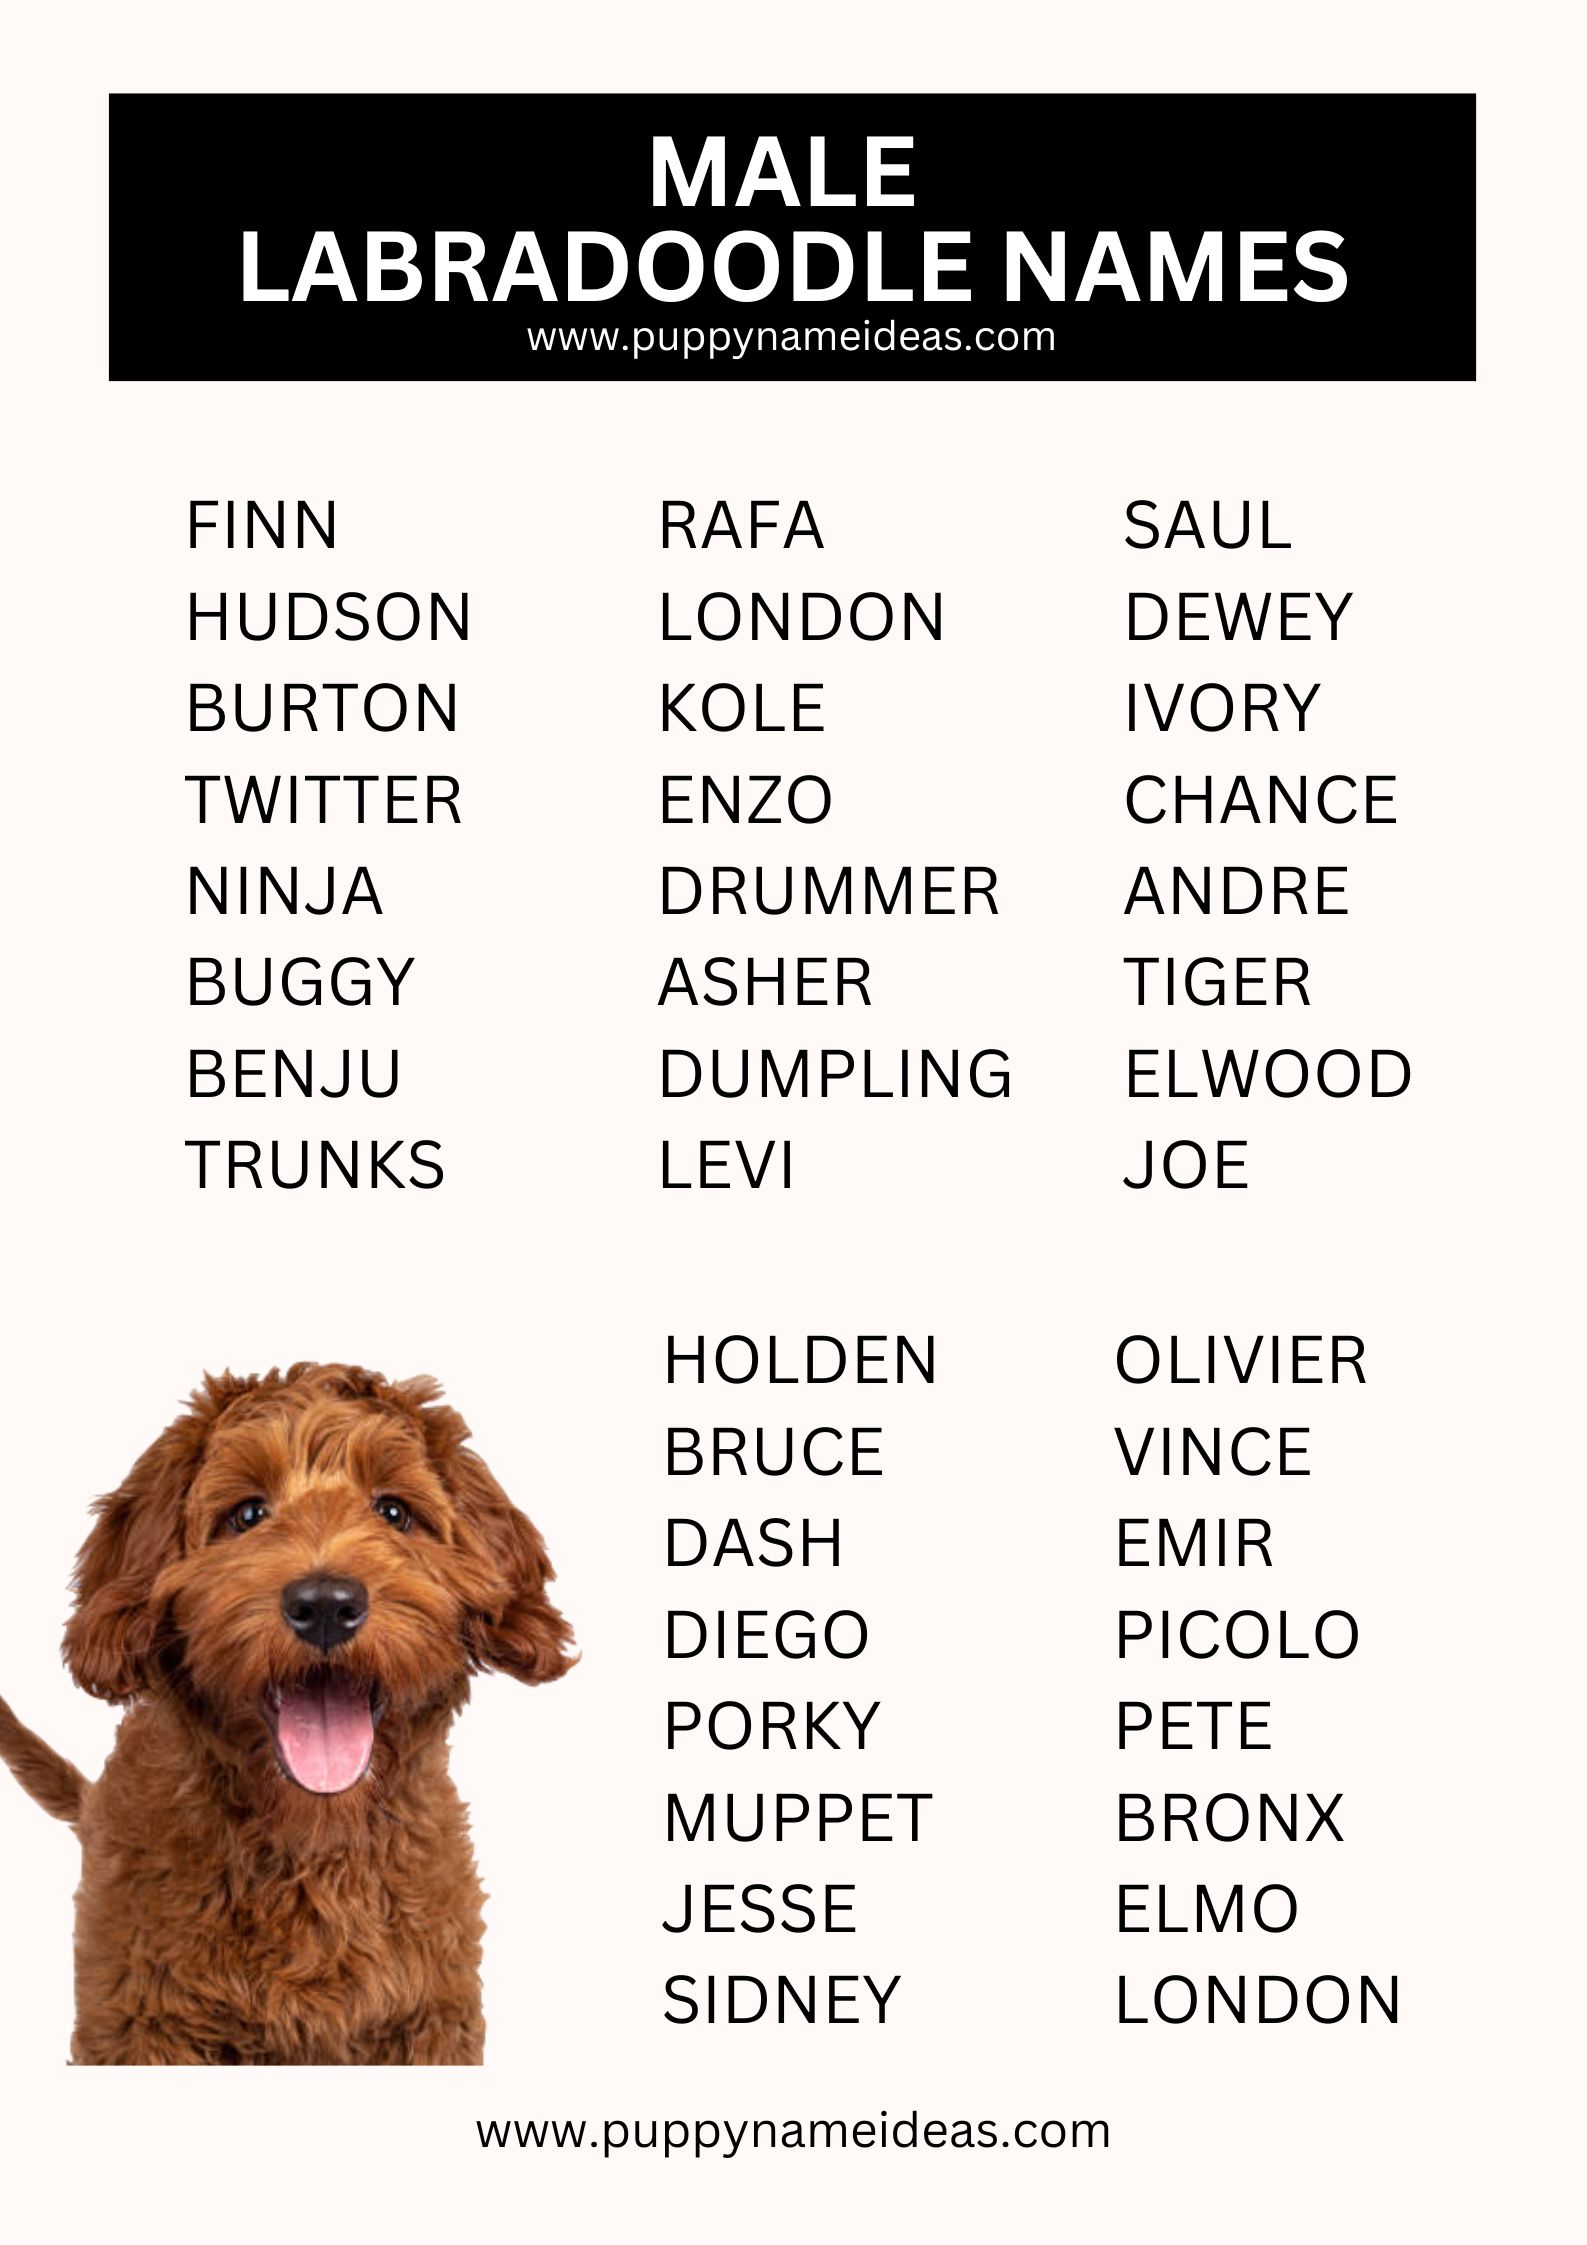 list of male labradoodle names